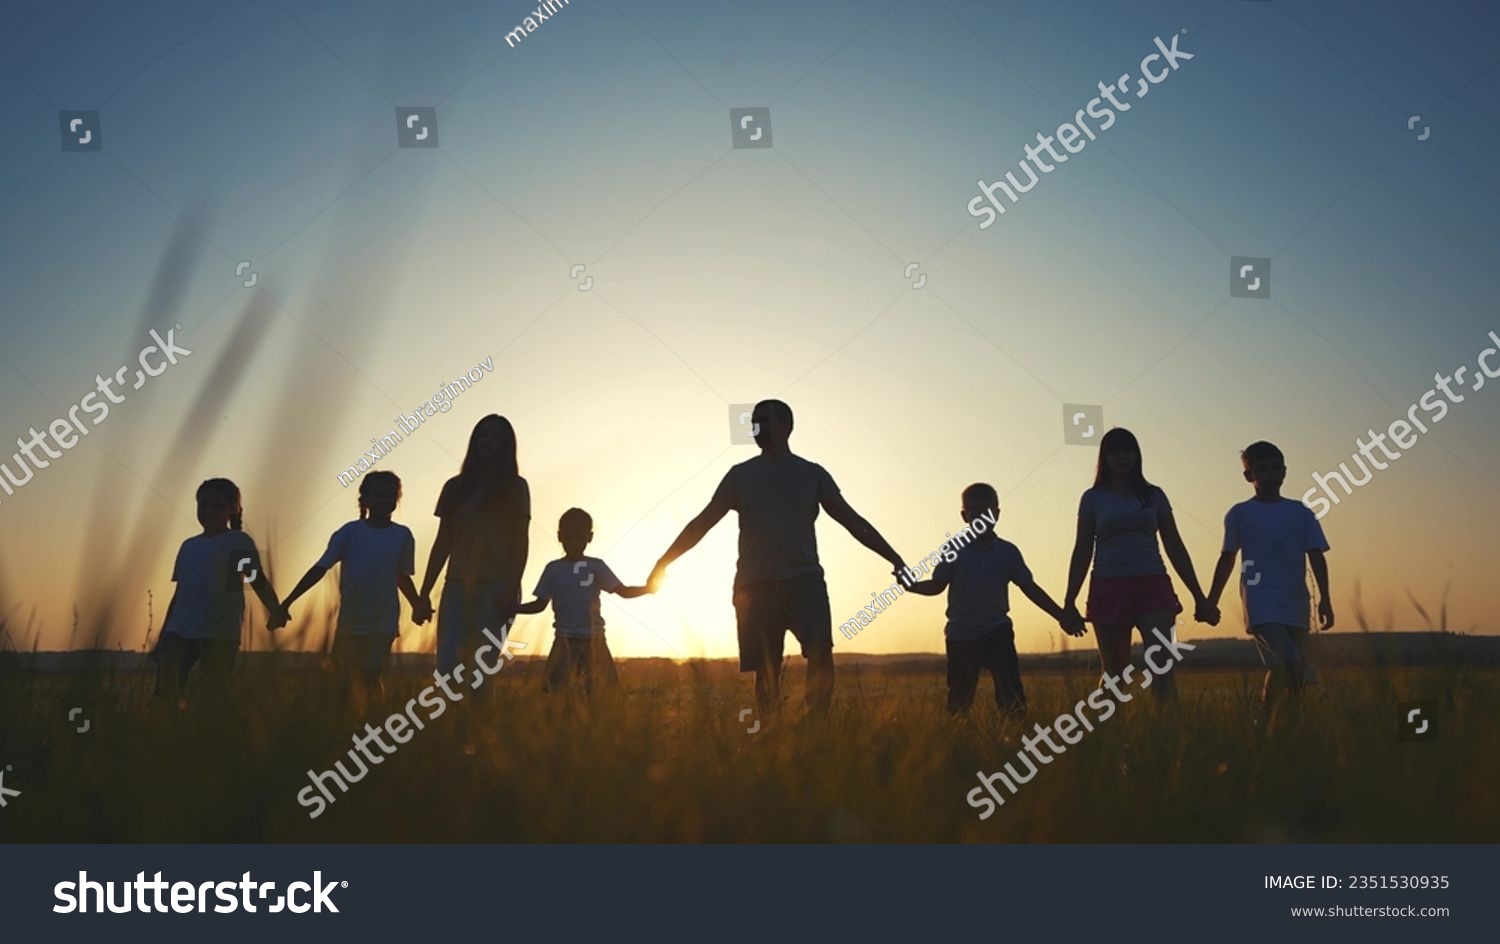 large family walks across field holding hands. happy family childhood dream concept. family walks across the field on the grass lifestyle at sunset and hold each other's hands dark silhouettes #2351530935